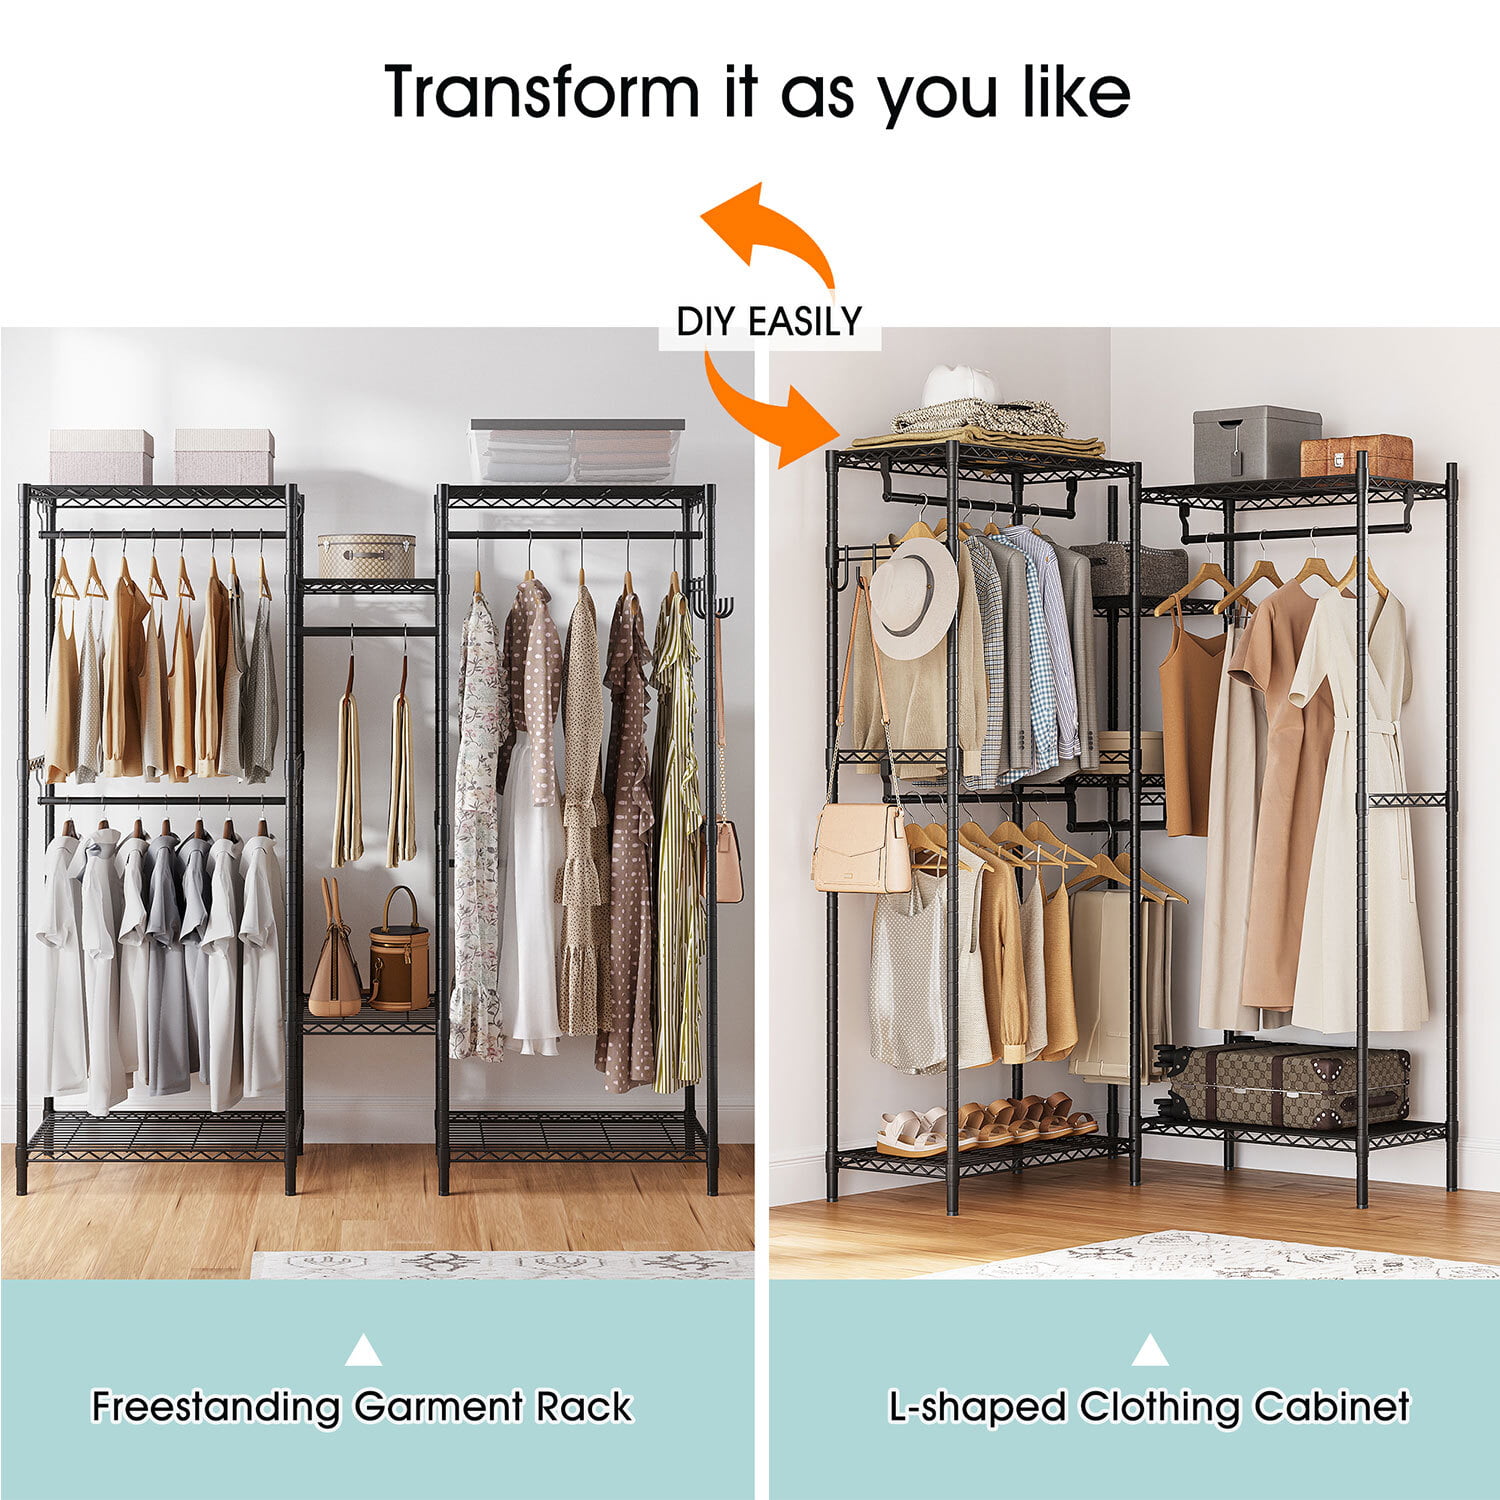 DIY Extra Wide Clothes Hanger for Big and/or Tall People 